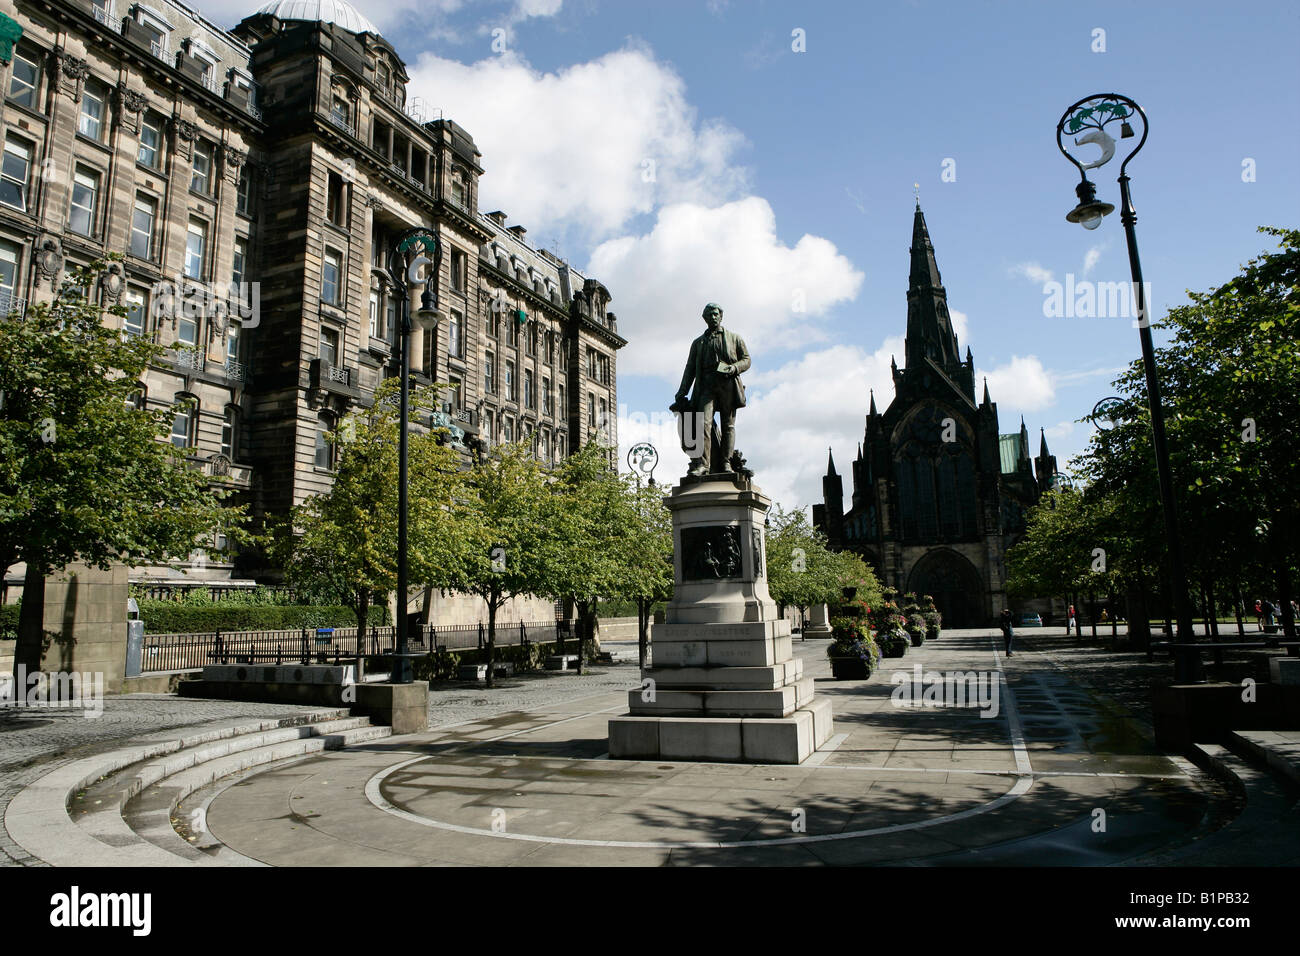 City of Glasgow, Scotland. Cathedral Precinct with the Royal Infirmary Hospital, David Livingston statue and Glasgow Cathedral. Stock Photo